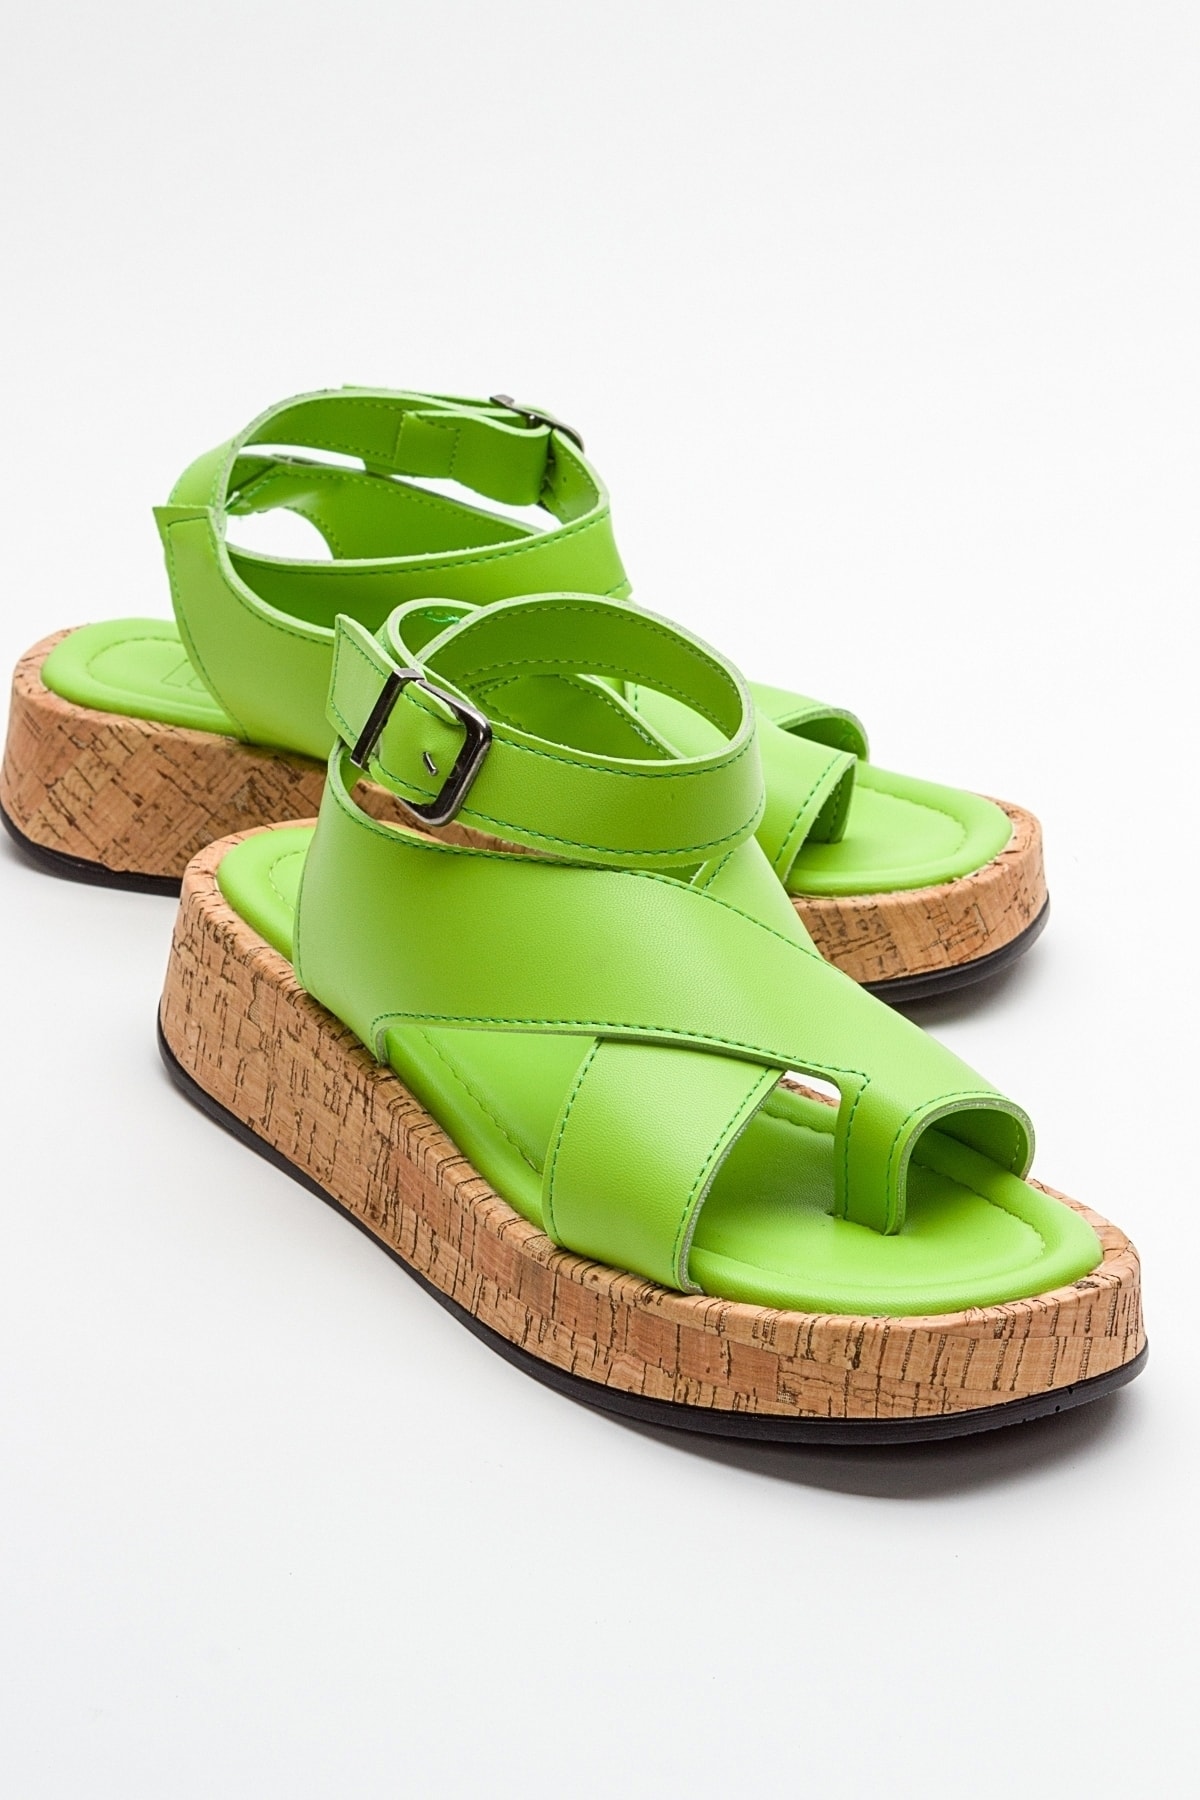 Levně LuviShoes SARY Women's Green Sandals